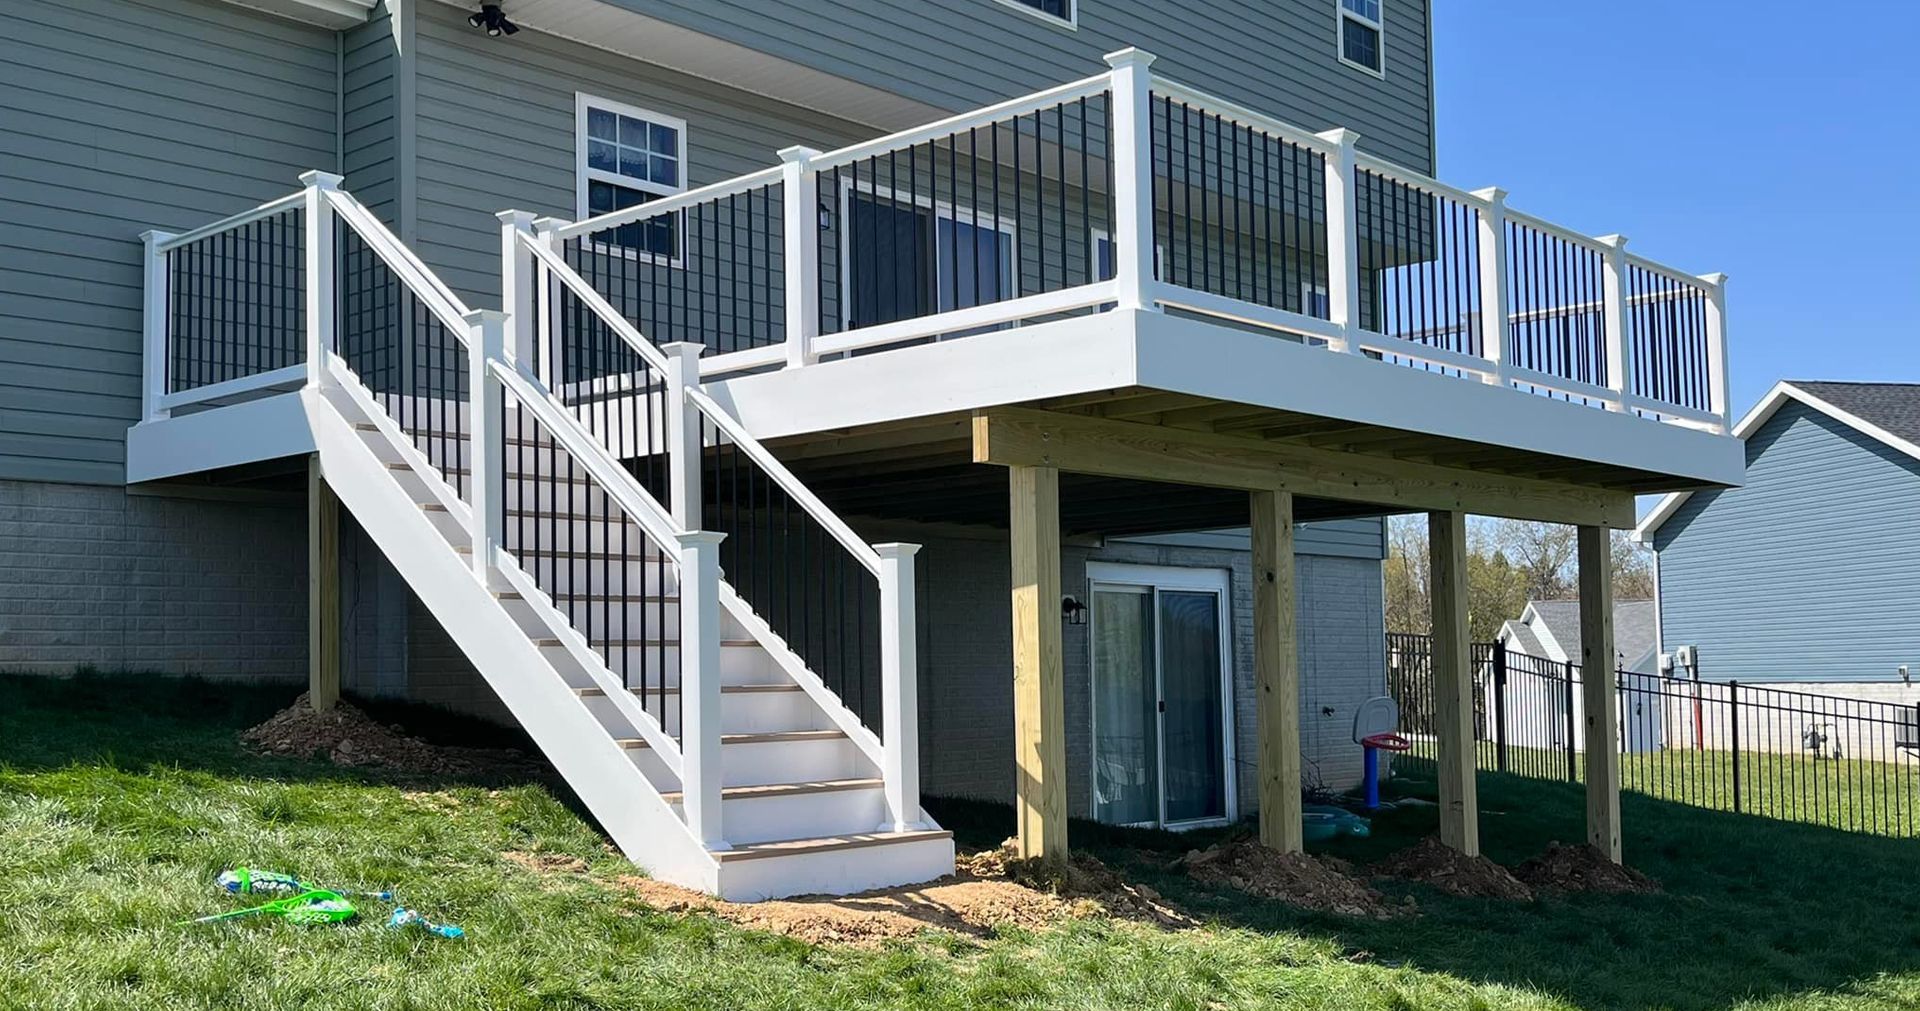 A deck with stairs leading up to it and a house in the background.